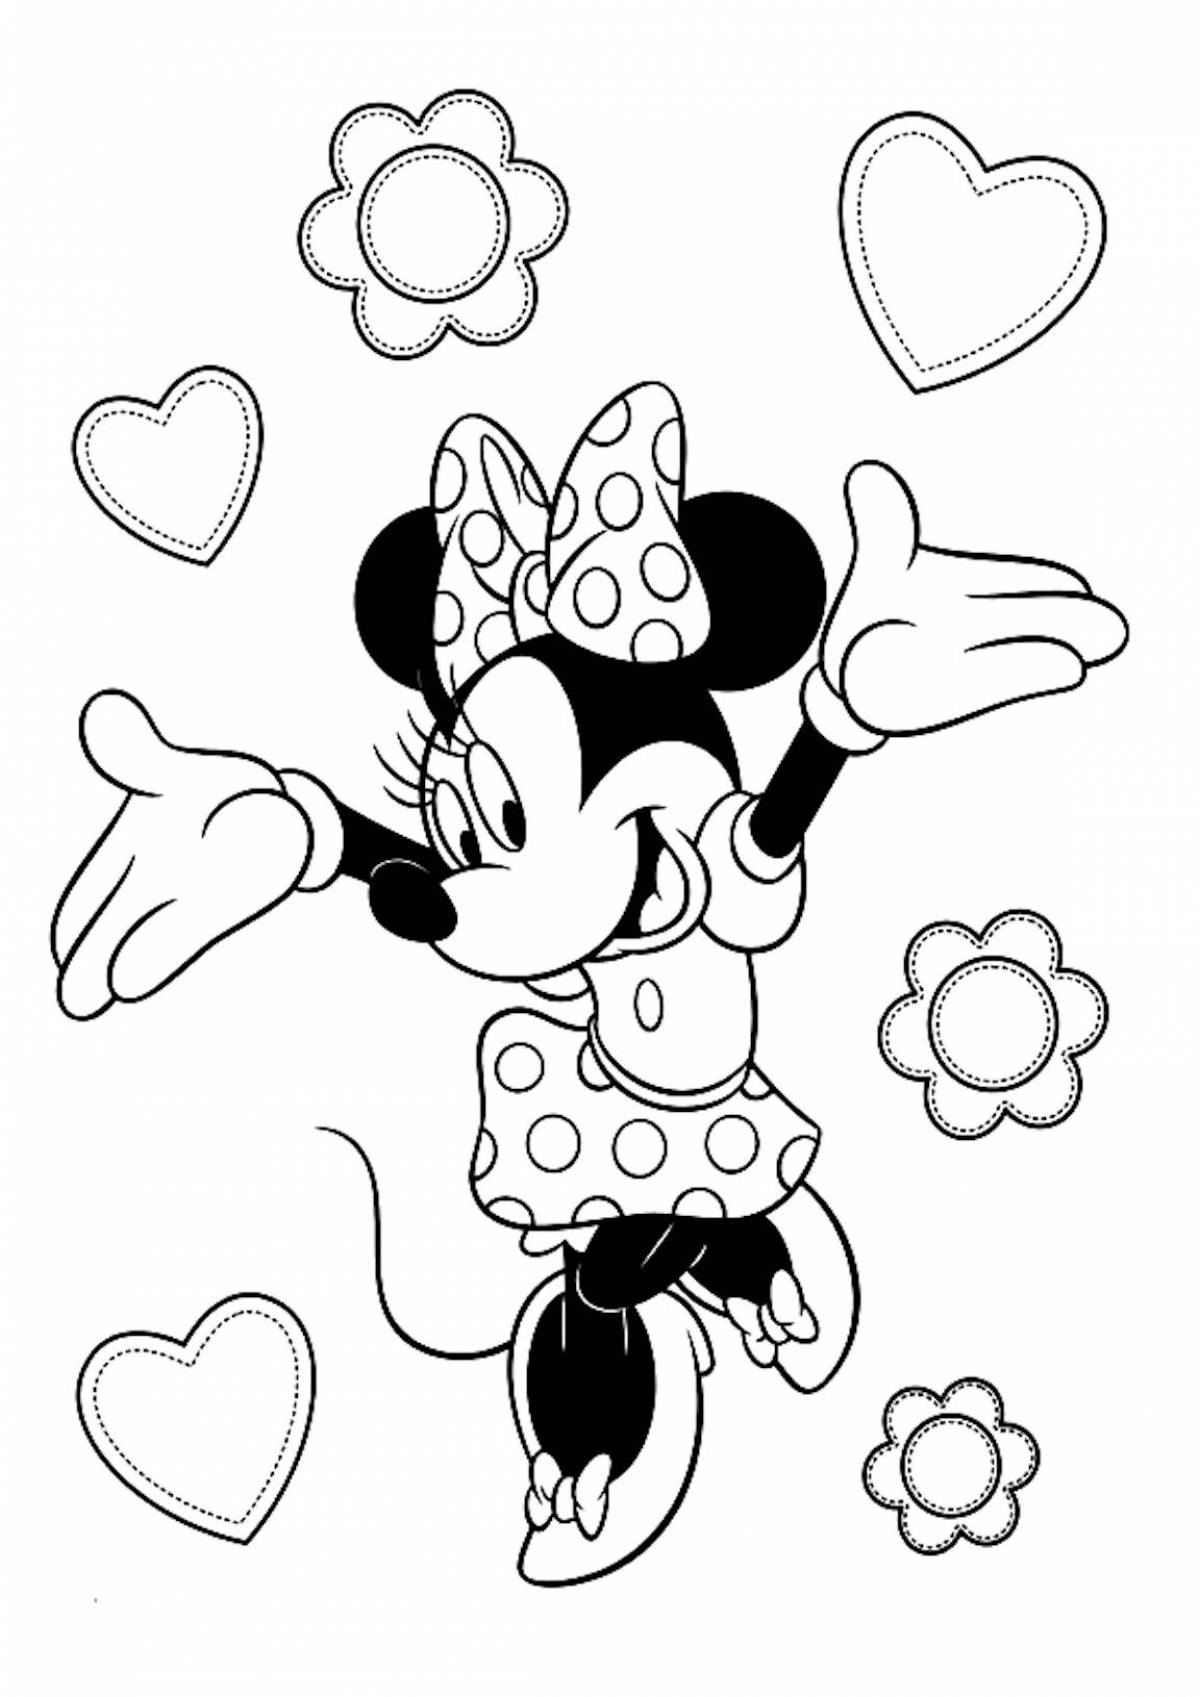 Playtime coloring page mickey mouse for girls